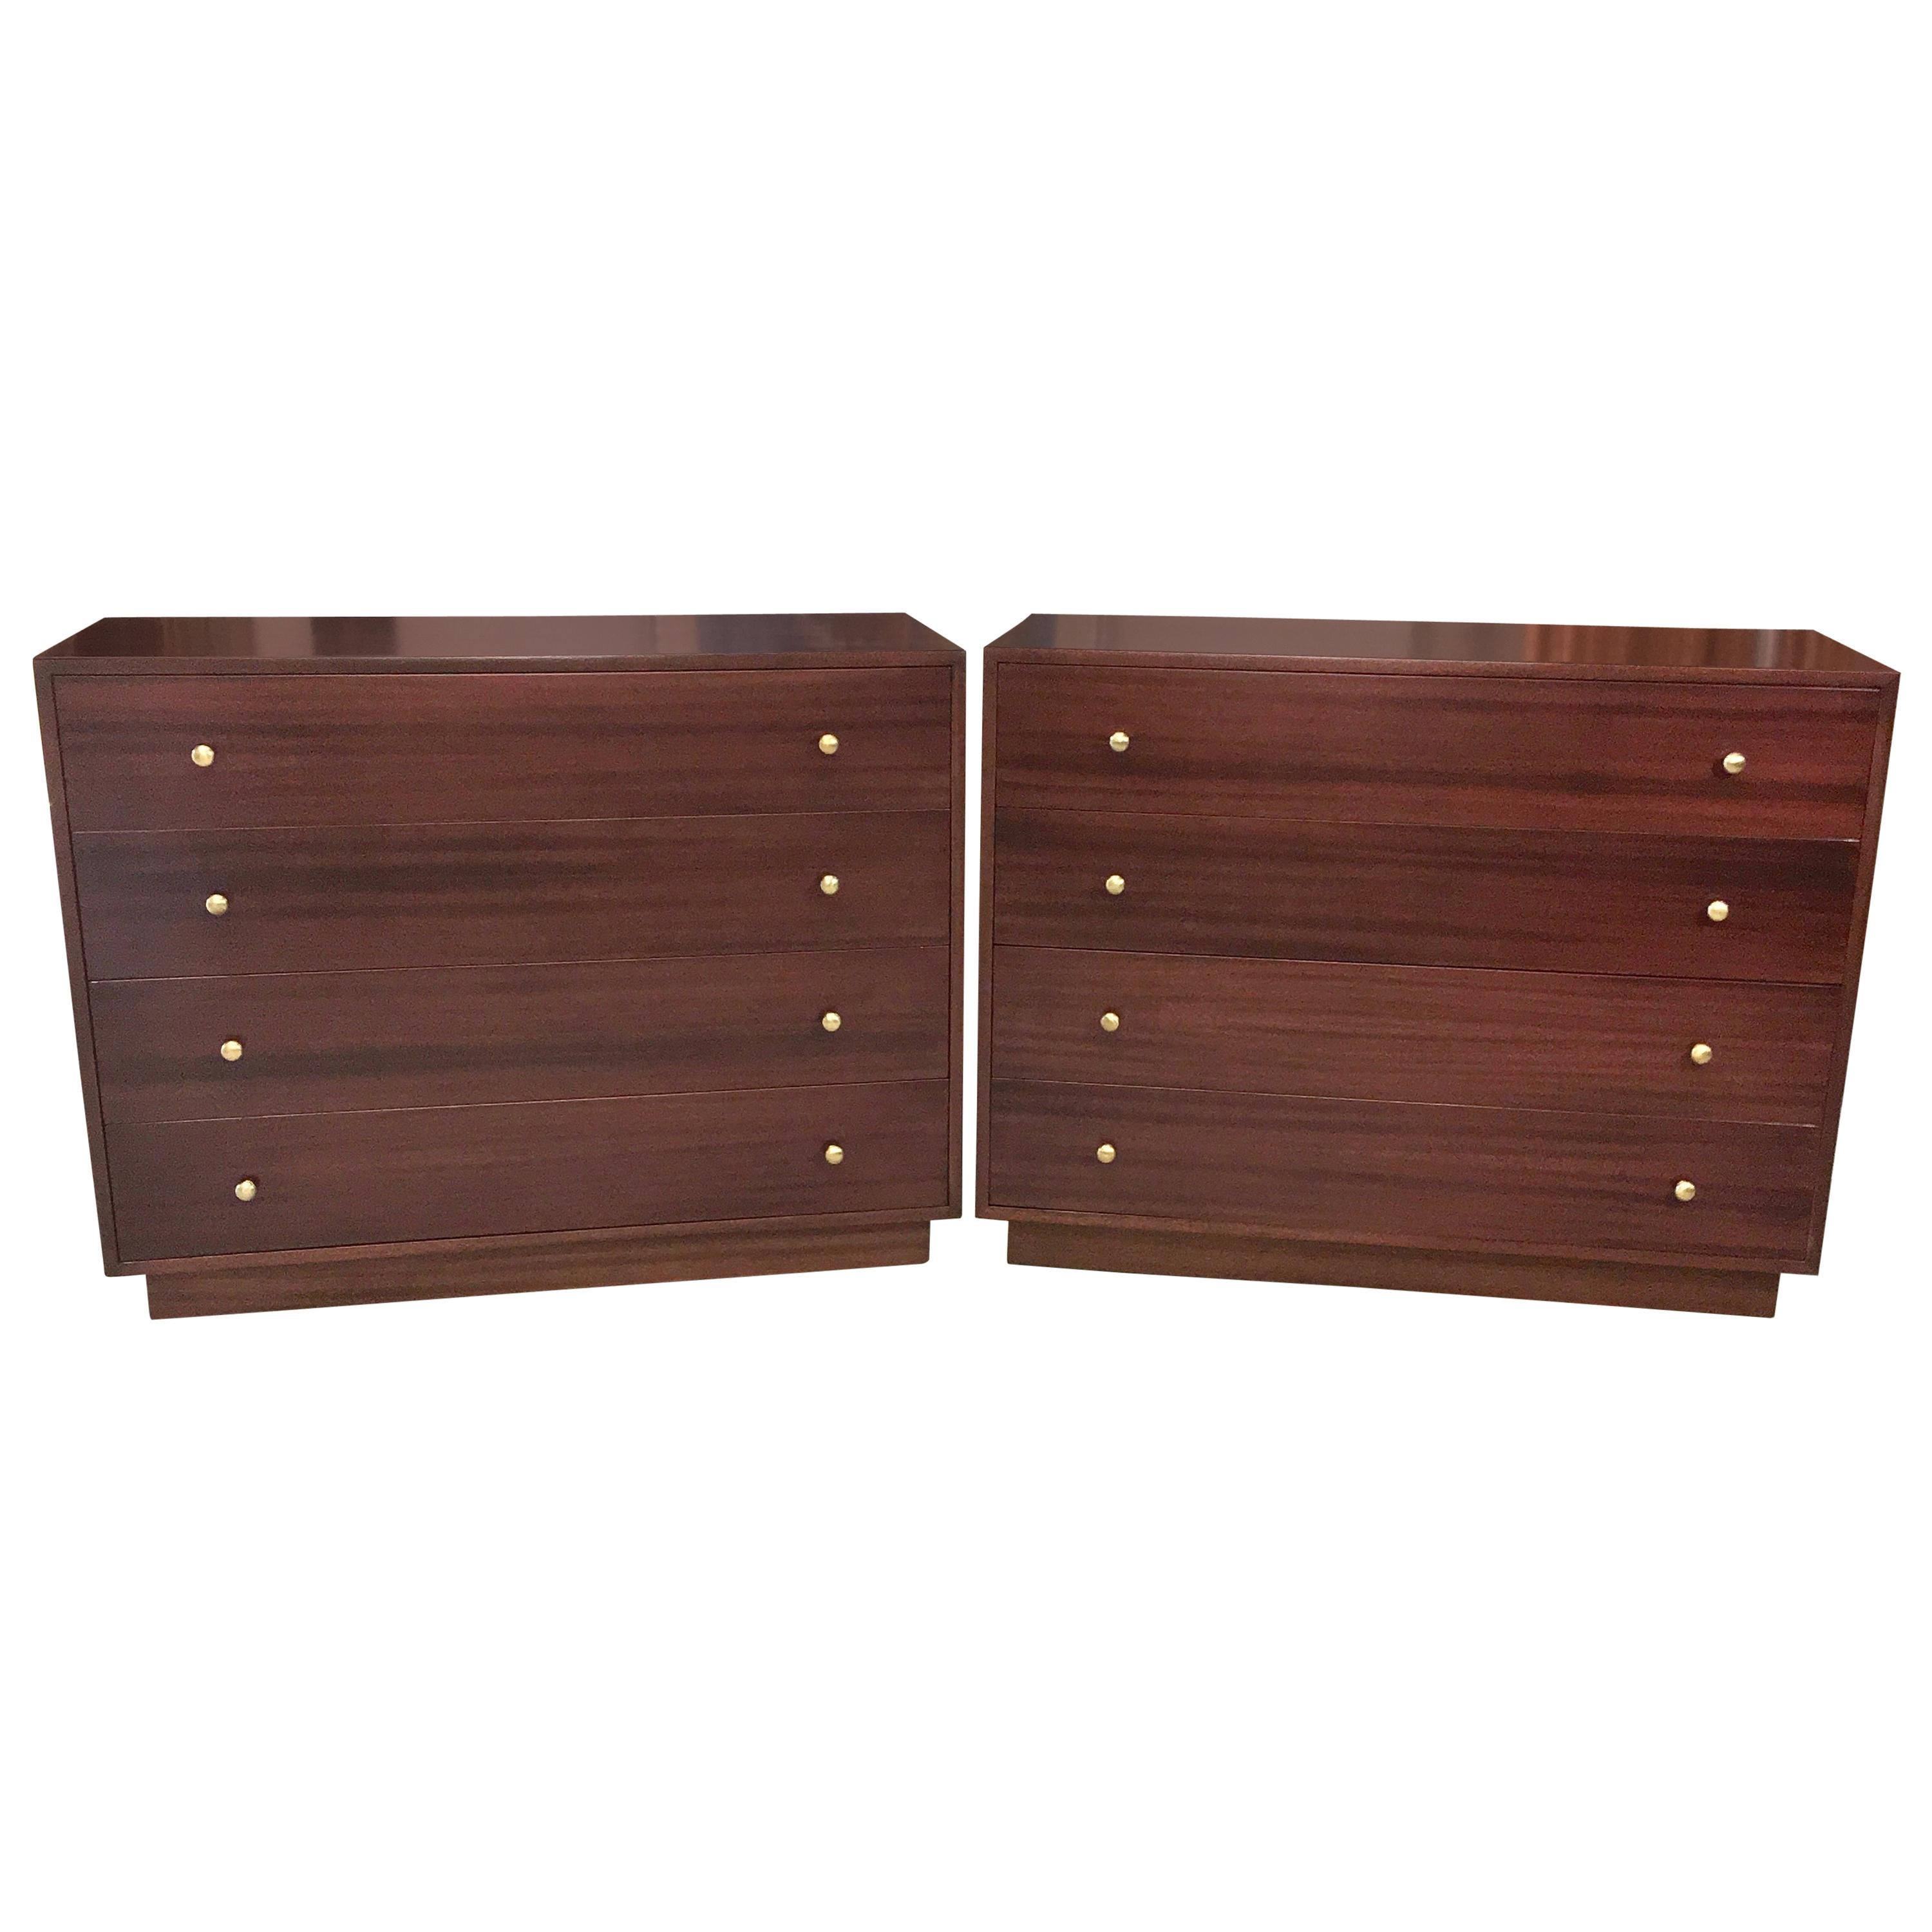 Pair of Harvey Probber Chests of Drawers